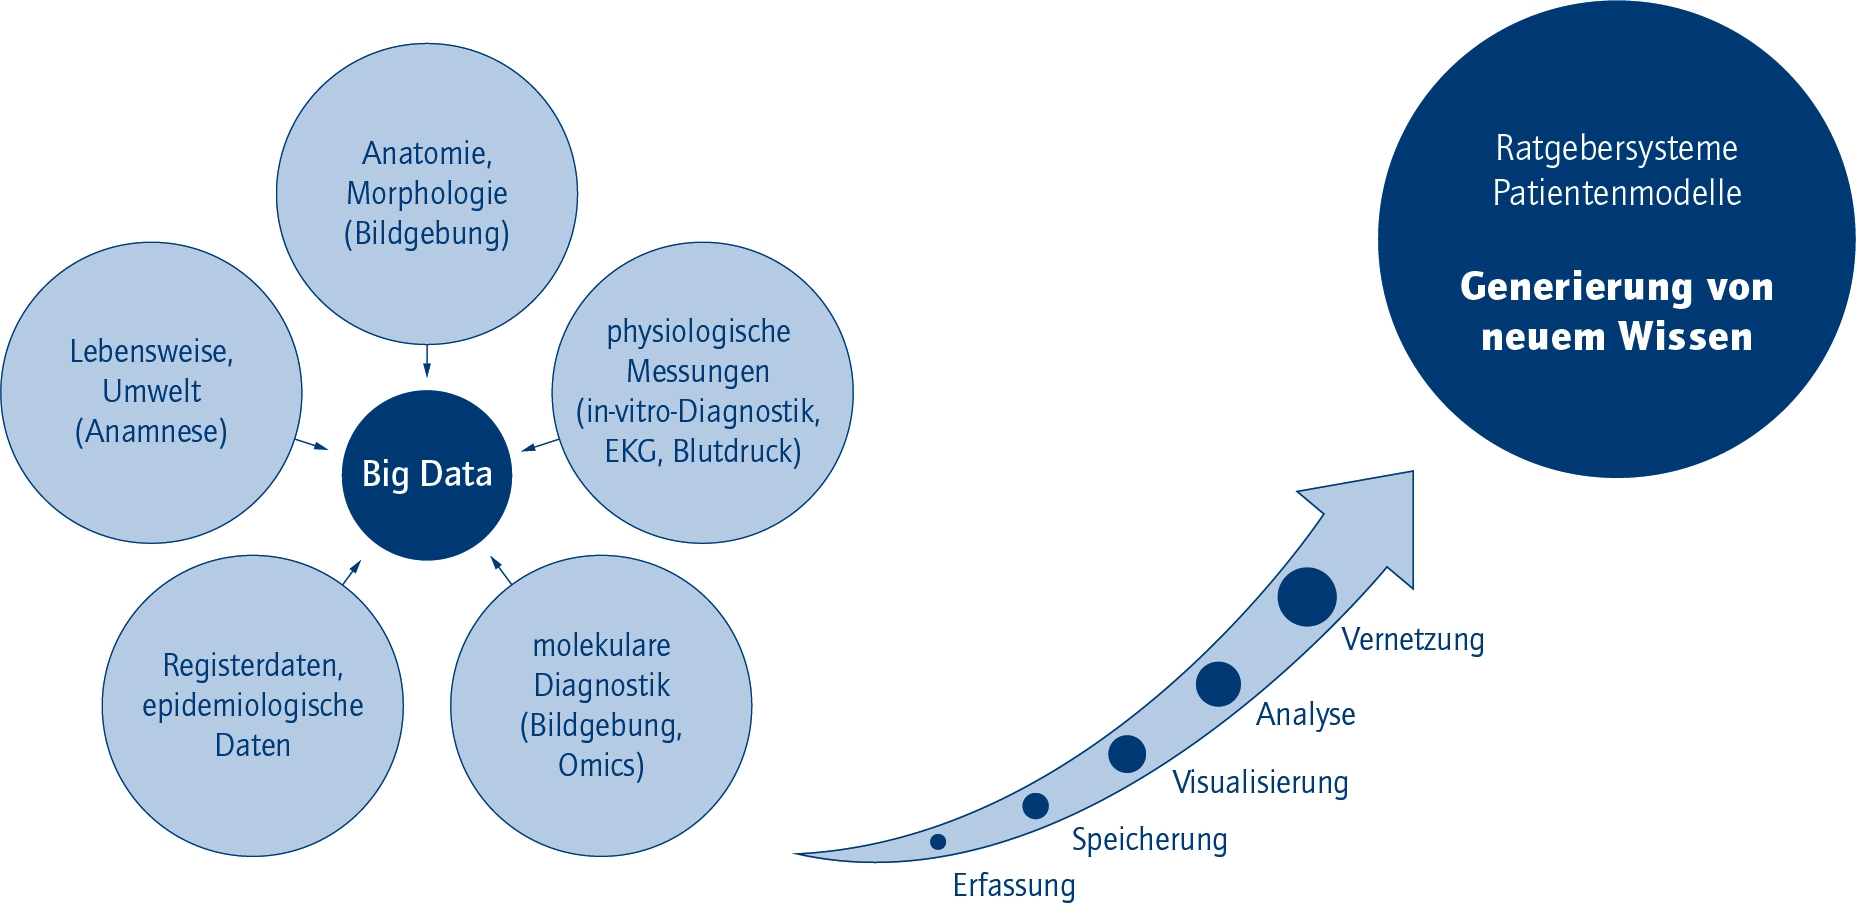 The diagram shows where big data is produced in the healthcare sector: during anamnesis, in registries, laboratory examinations and diagnostics. This data needs to be acquired, stored, visualised, analysed and combined in order for knowledge to be created